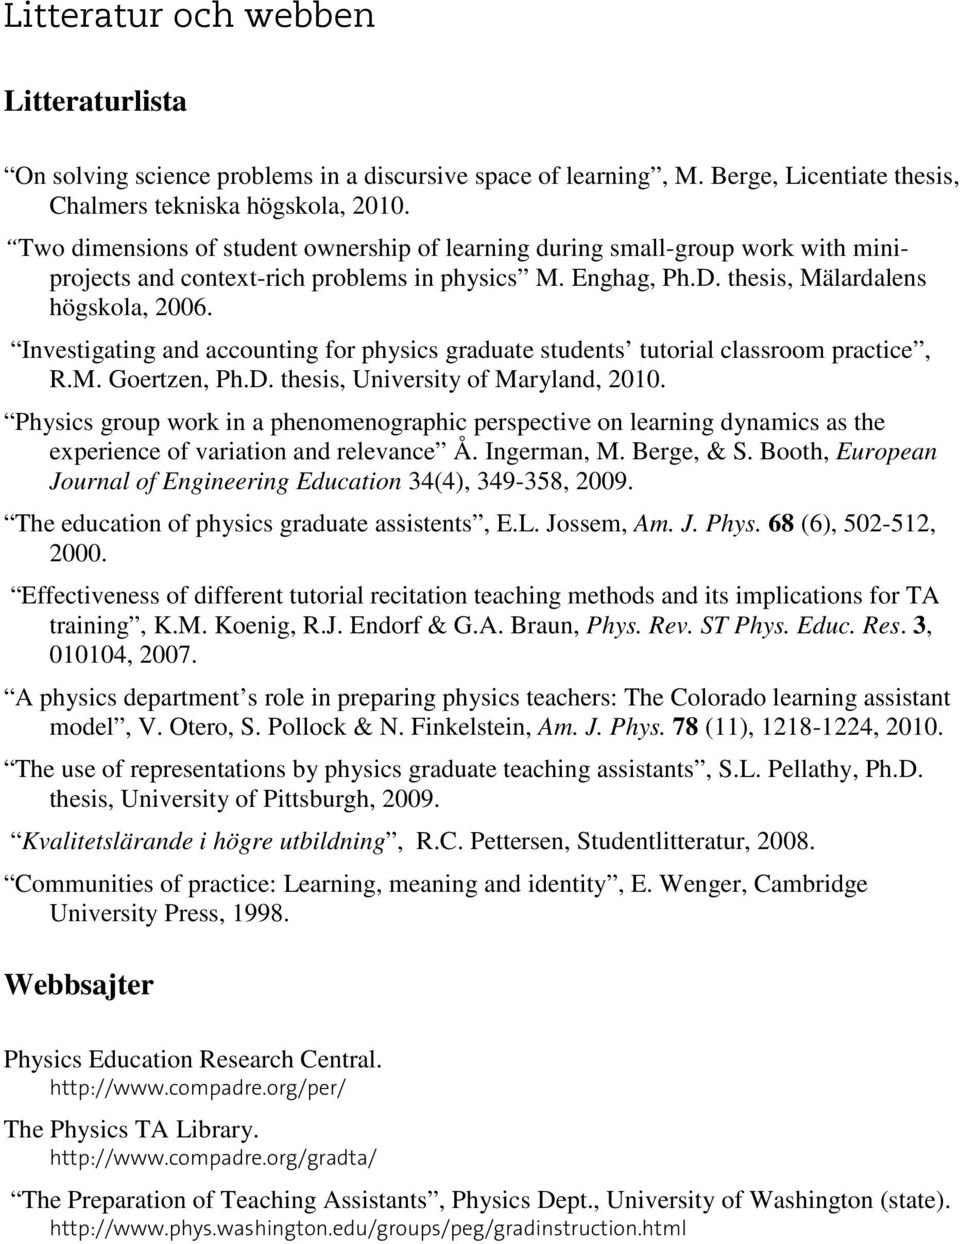 Investigating and accounting for physics graduate students tutorial classroom practice, R.M. Goertzen, Ph.D. thesis, University of Maryland, 2010.